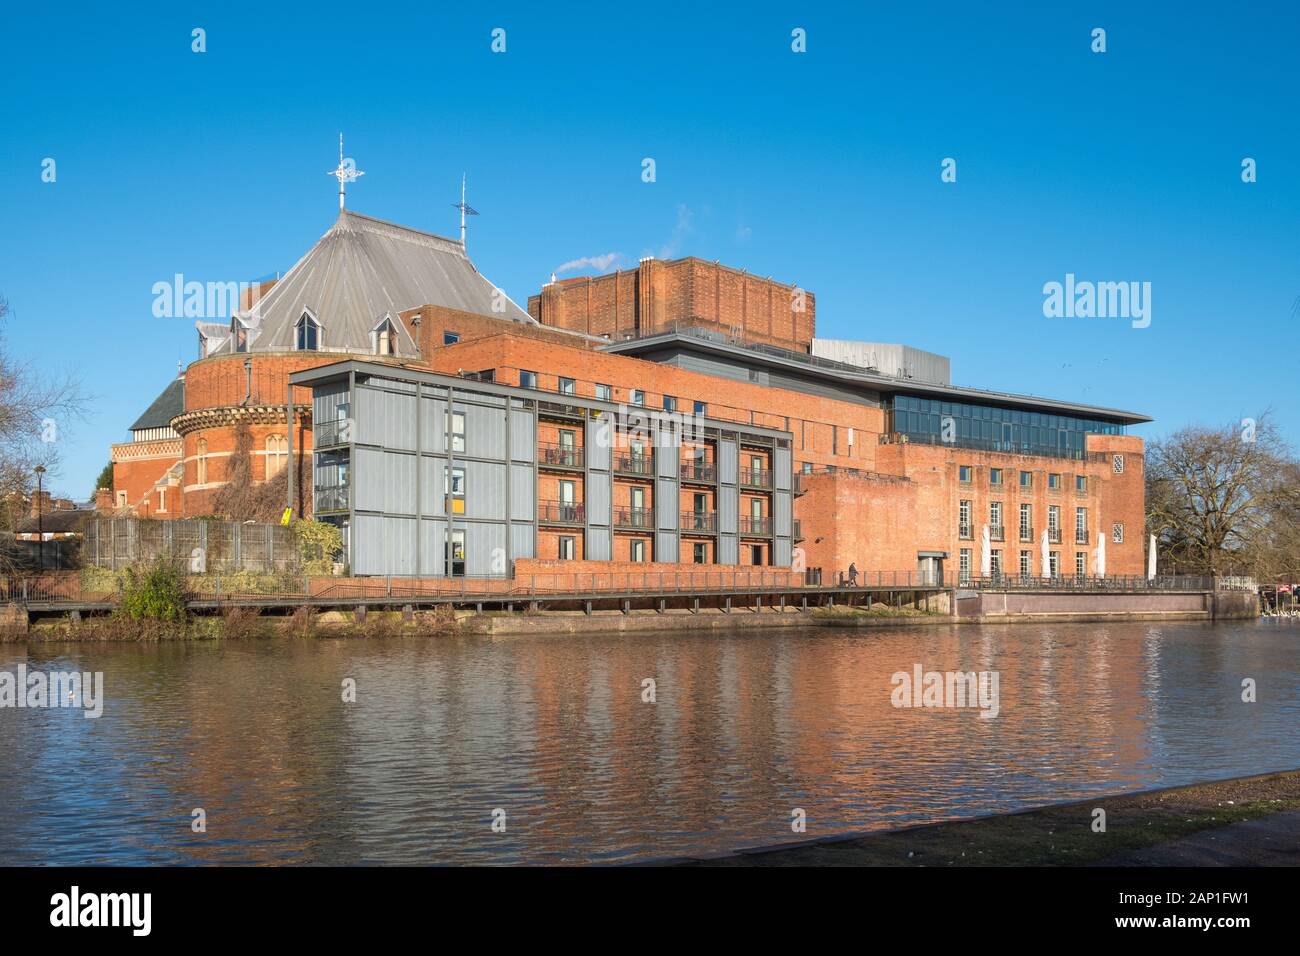 The Royal Shakespeare Theatre on the bank of the River Avon on Stratford-upon-Avon, Warwickshire, UK Stock Photo